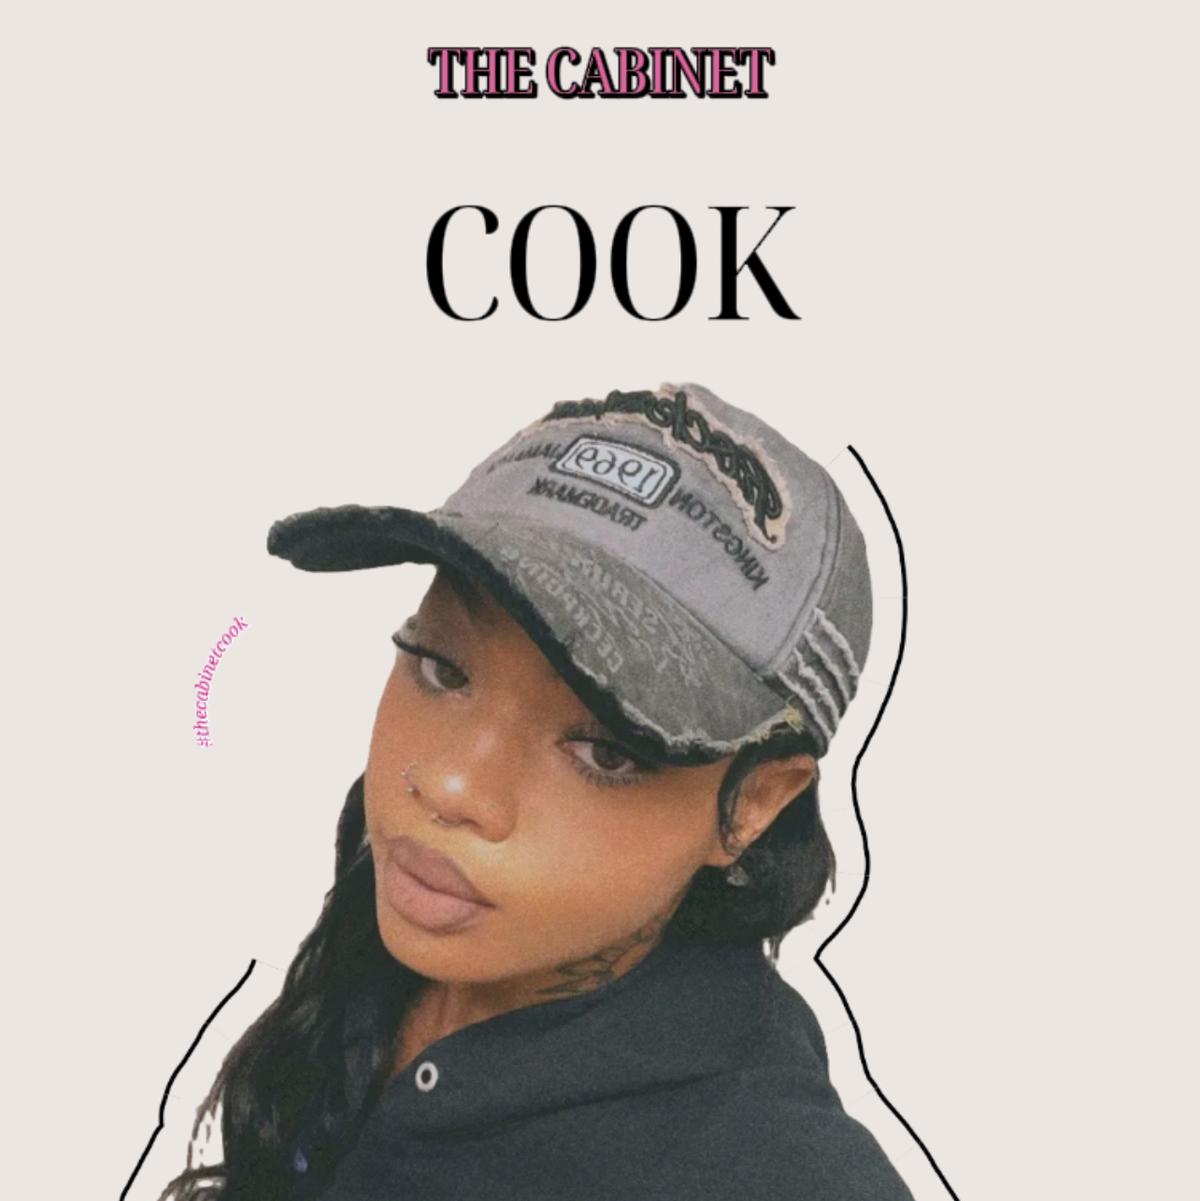 TheCabinetCook's images